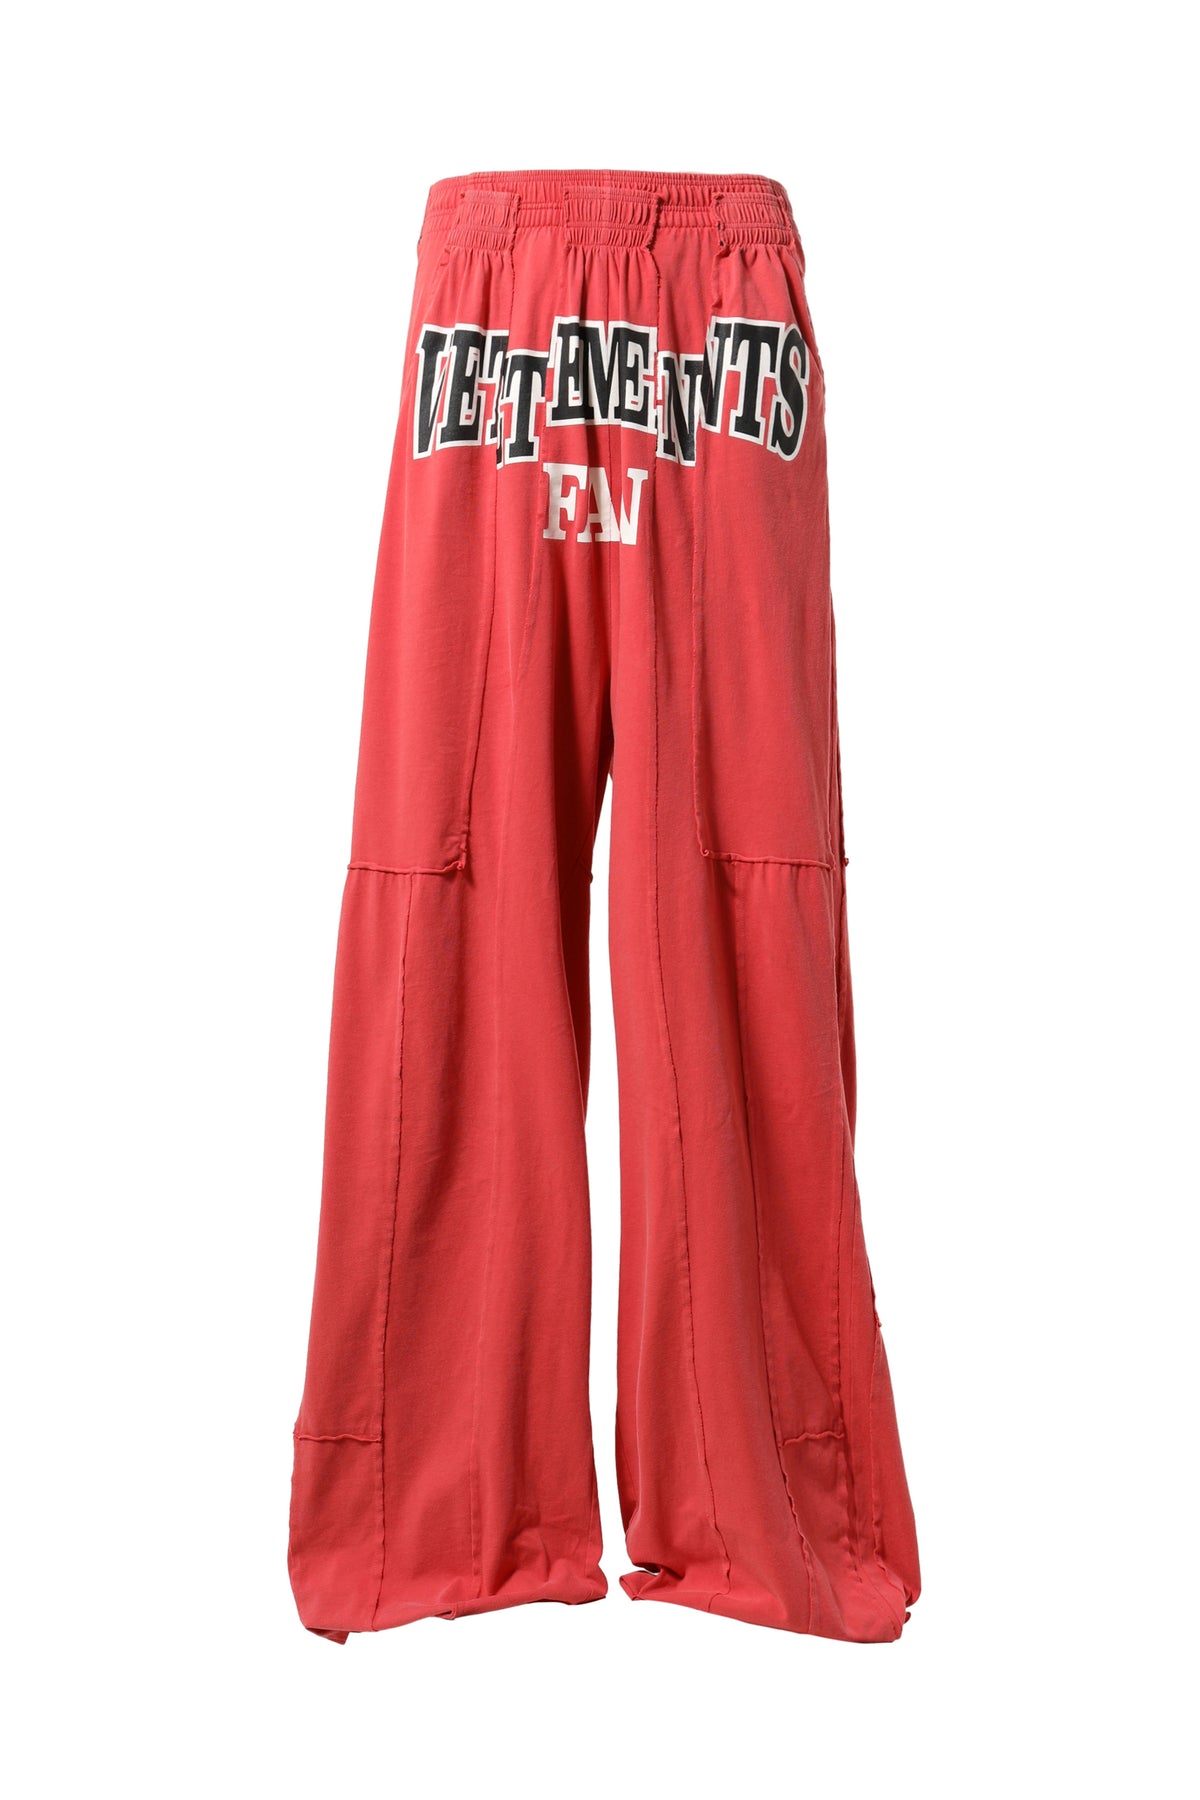 VETEMENTS FAN DECONSTRUCTED SWEATPANTS / WASHED RED